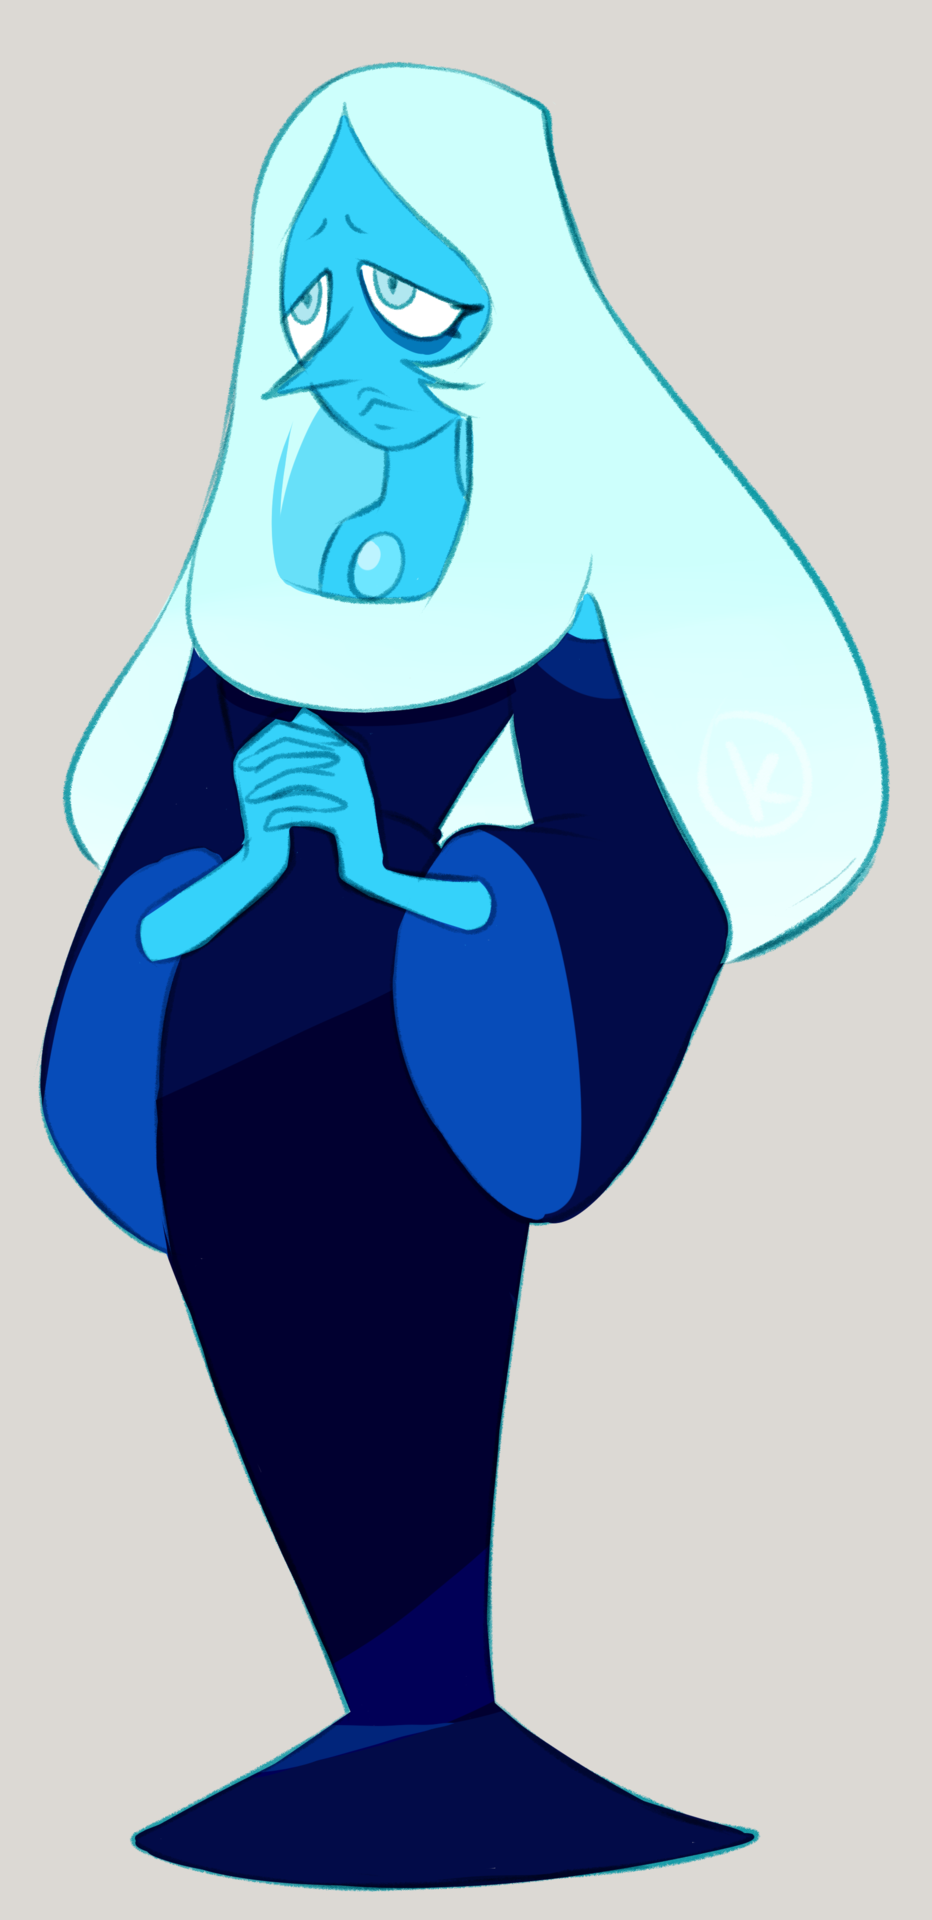 diamonds but they’re pearl shaped